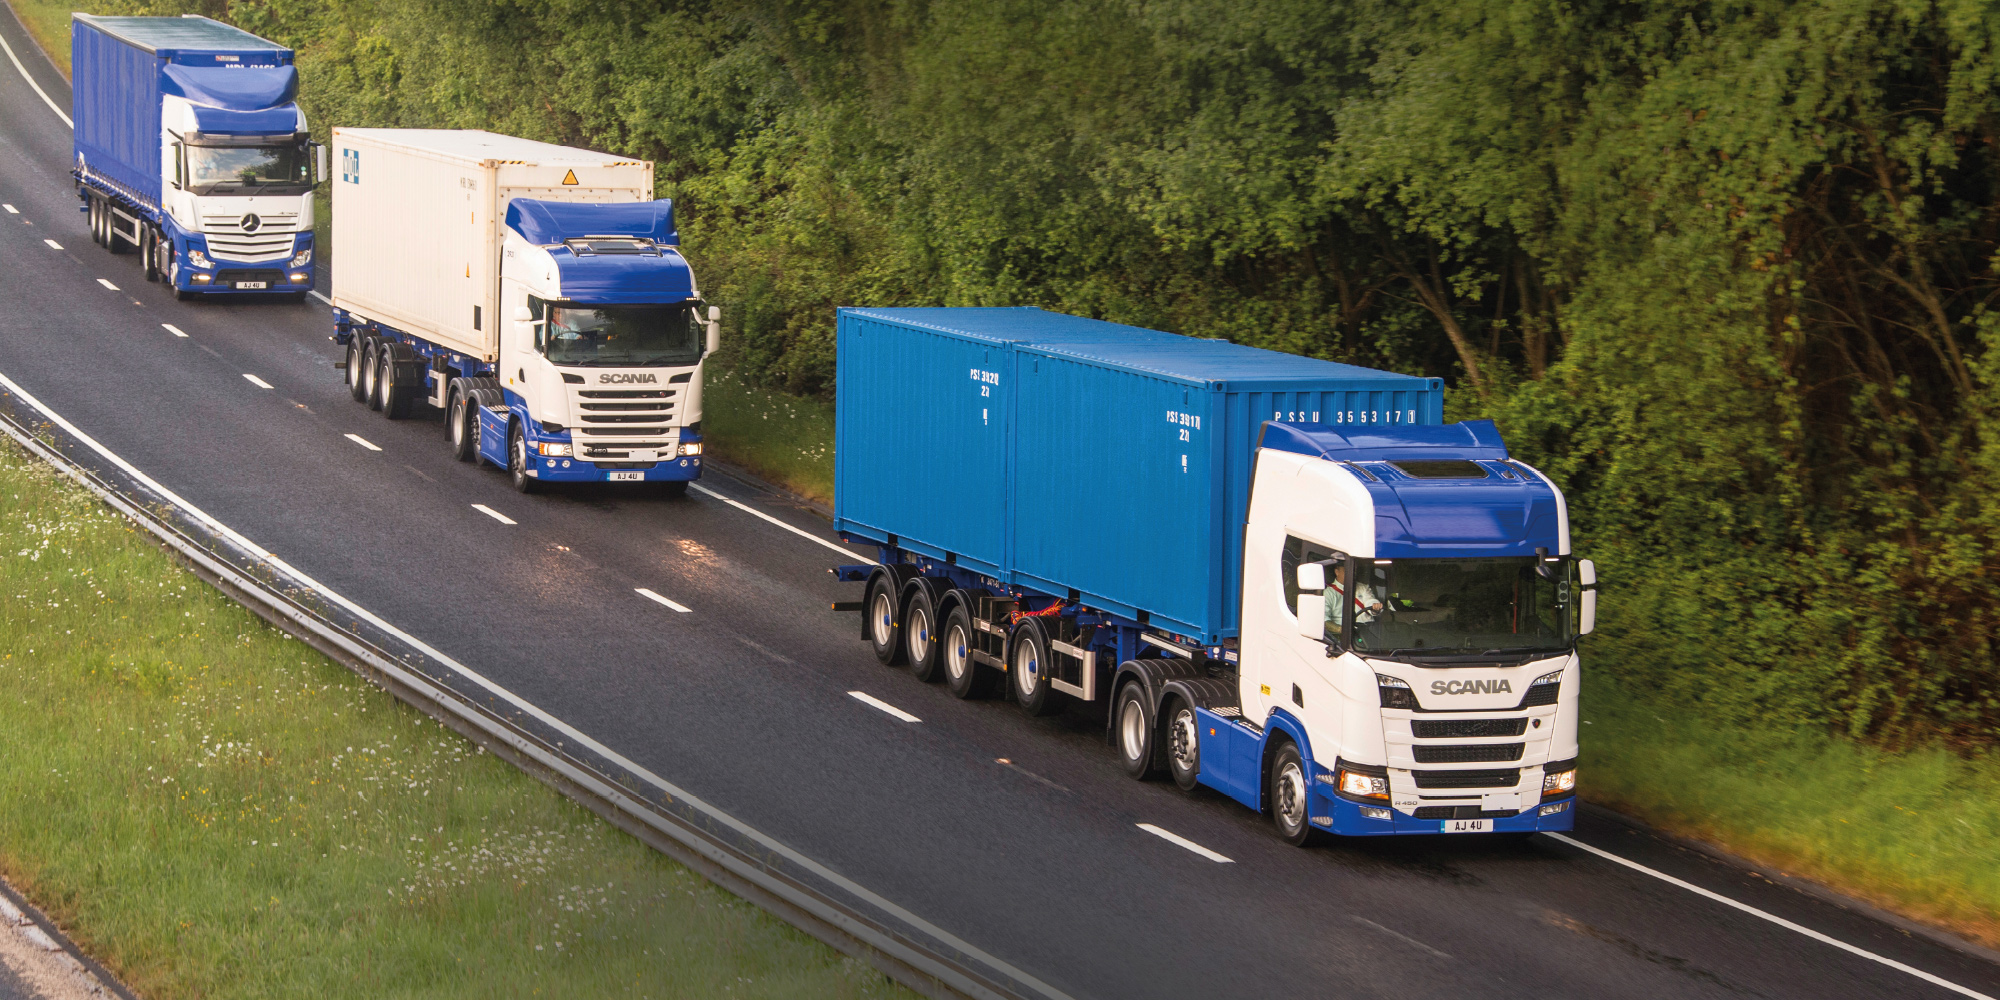 HGV Weekly Rest Periods & Working Two Jobs